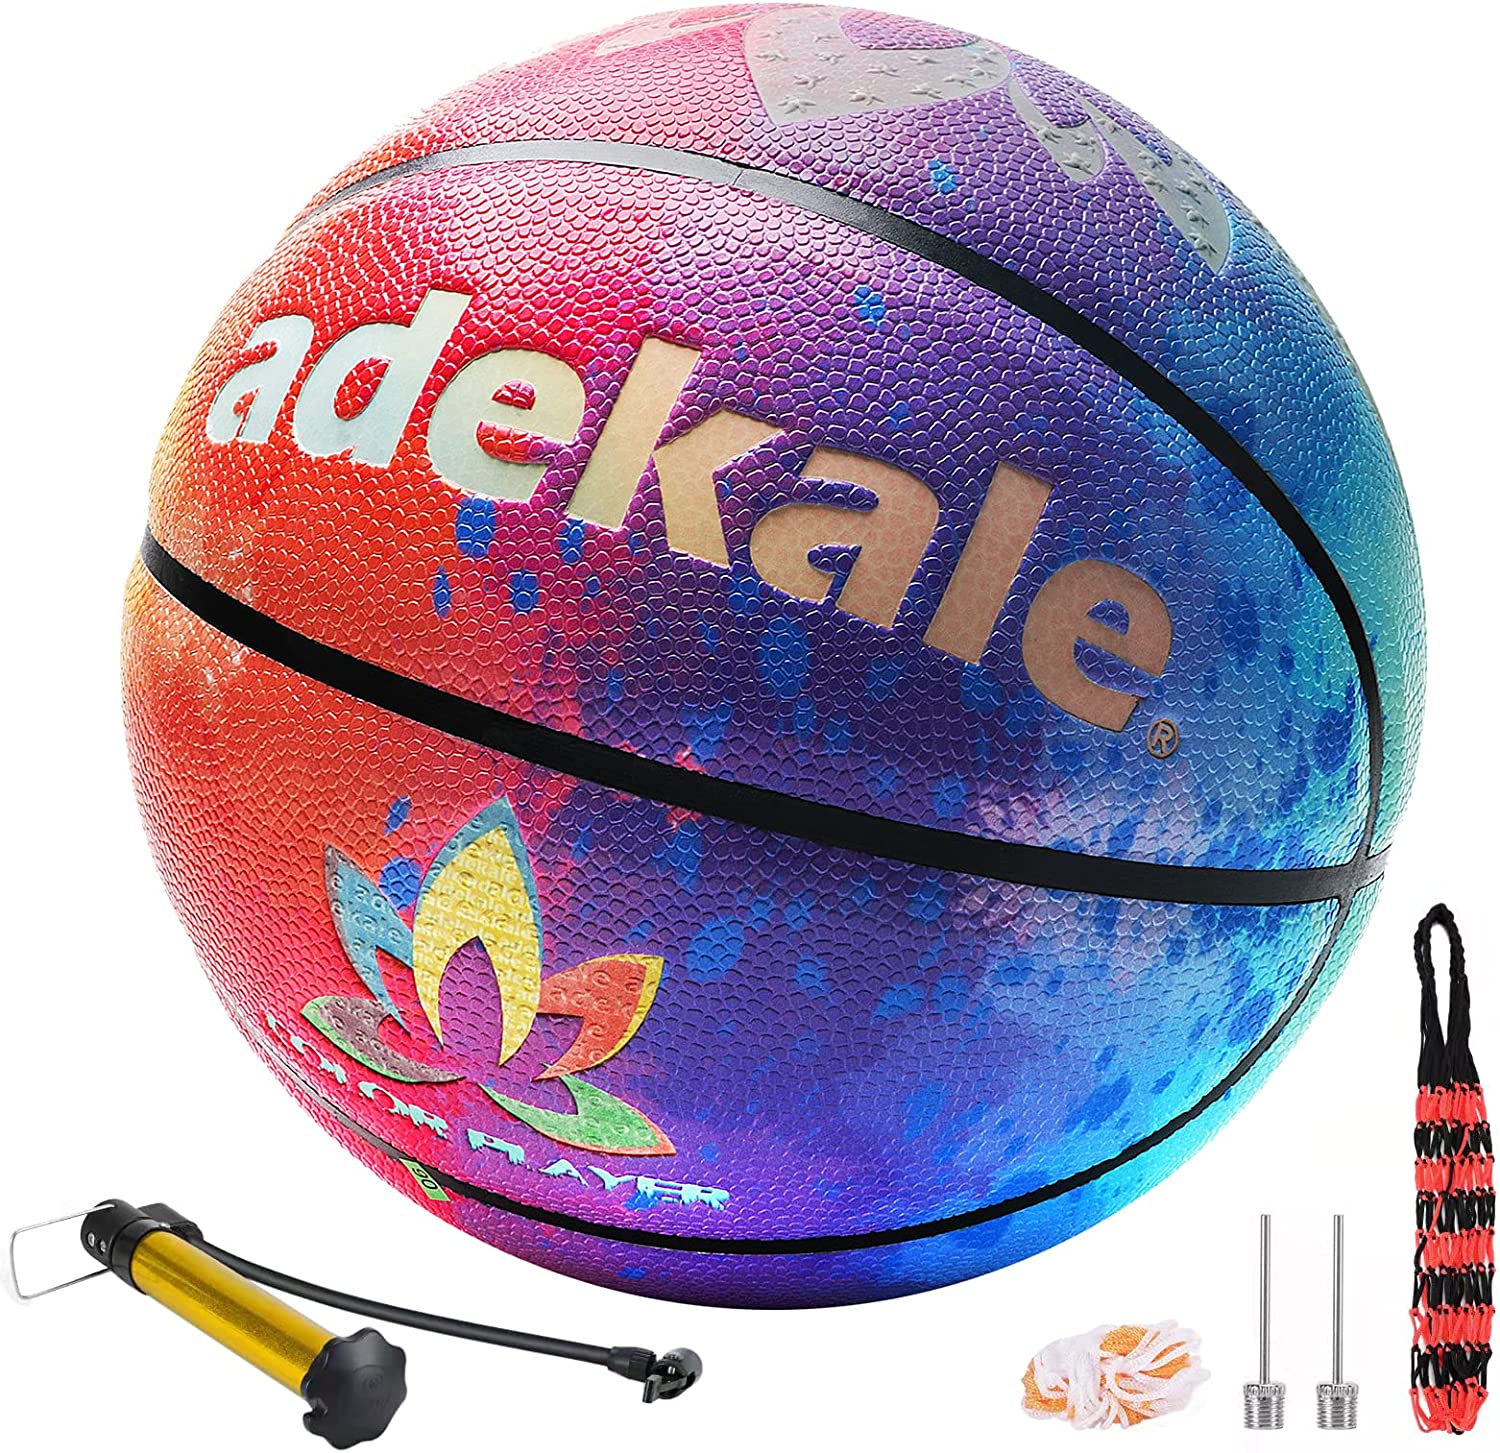 Neon Red LIOOBO Luminous Basketball Light Up Glow in the Dark Basketball Night Game Street Pu Glowing Light Basketball for Adults Outdoor Night Training 